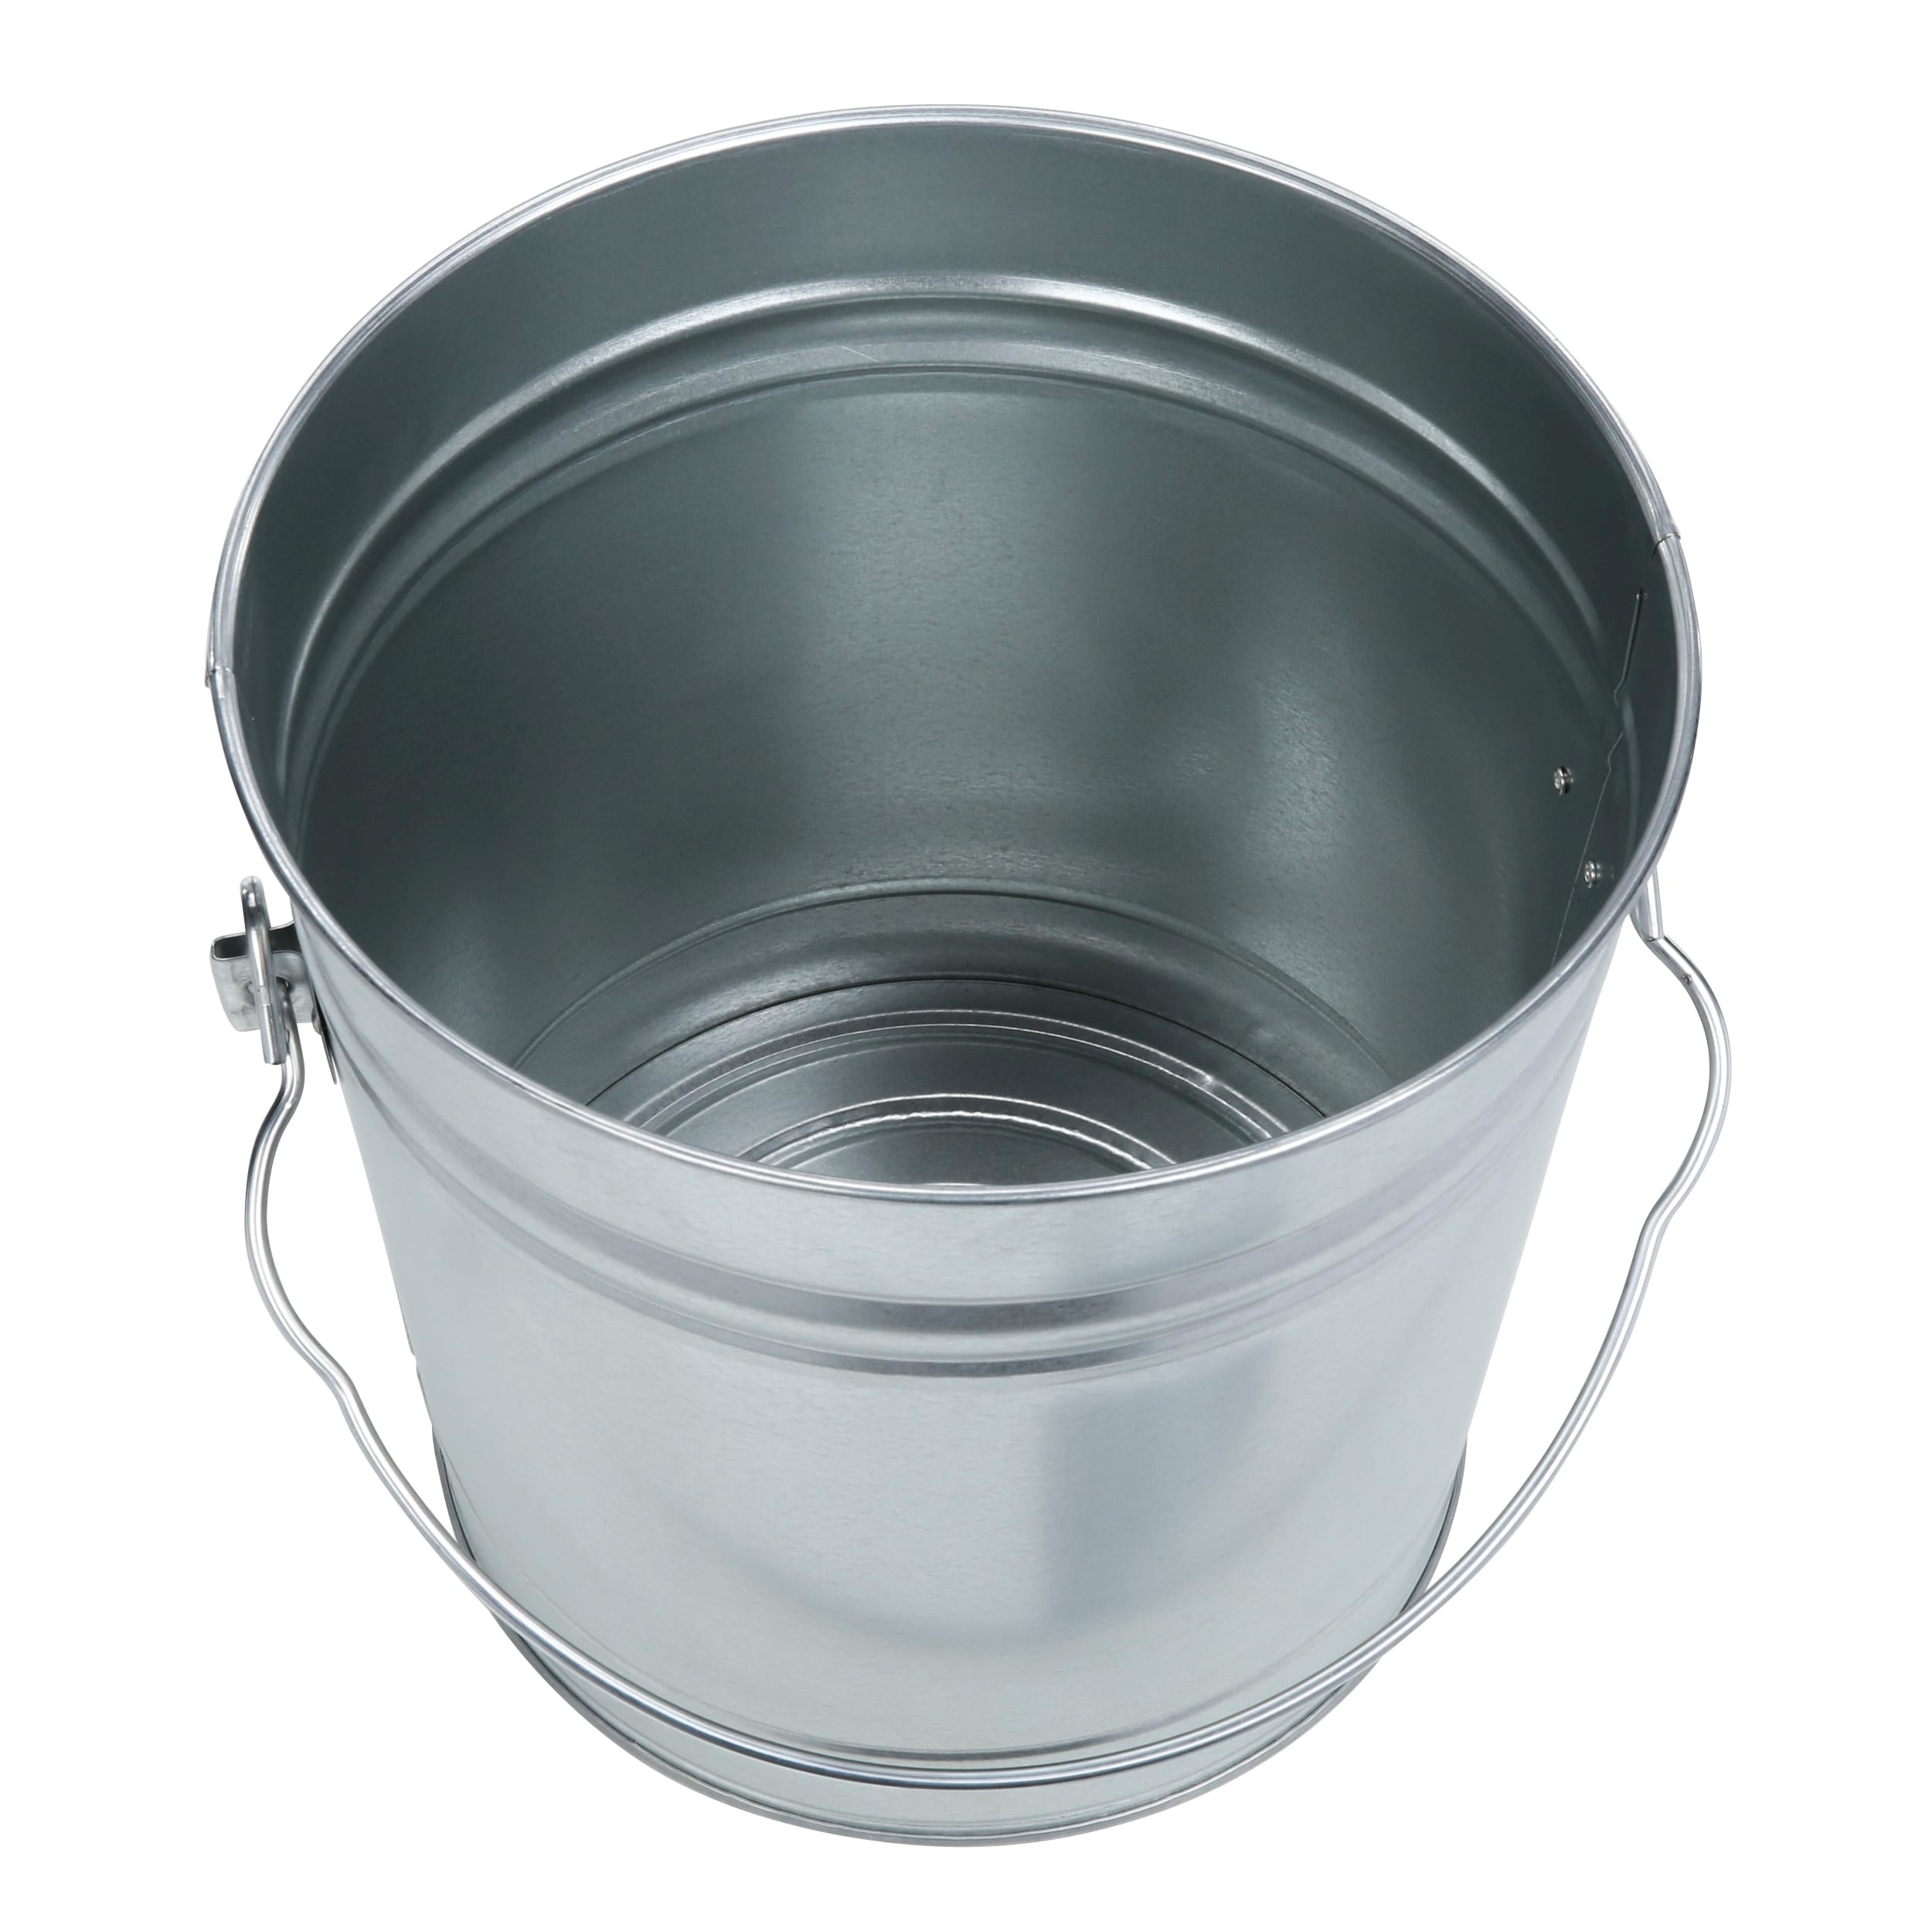 1pc Galvanized Trash Can with Lid Galvanized Planters Countertop Trash Can